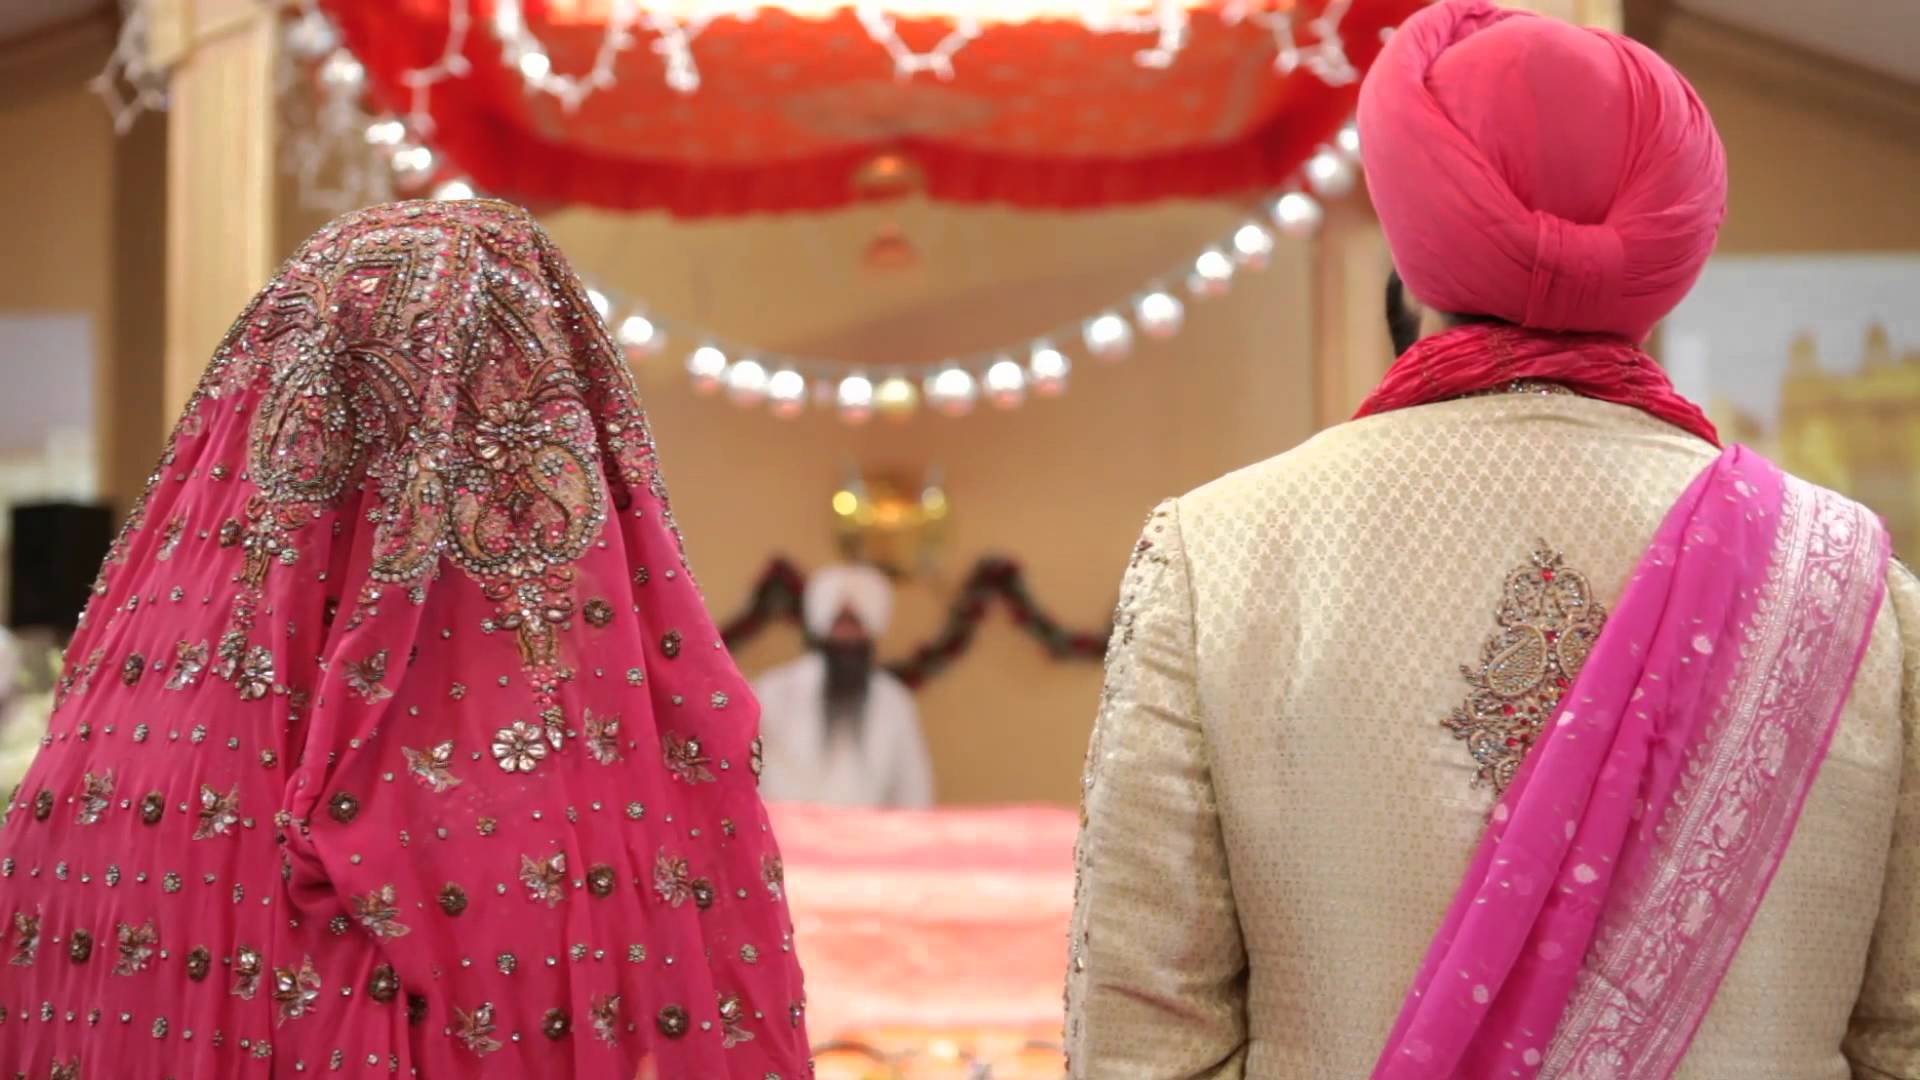 7 Things to Look Forward to in a Punjabi Wedding!